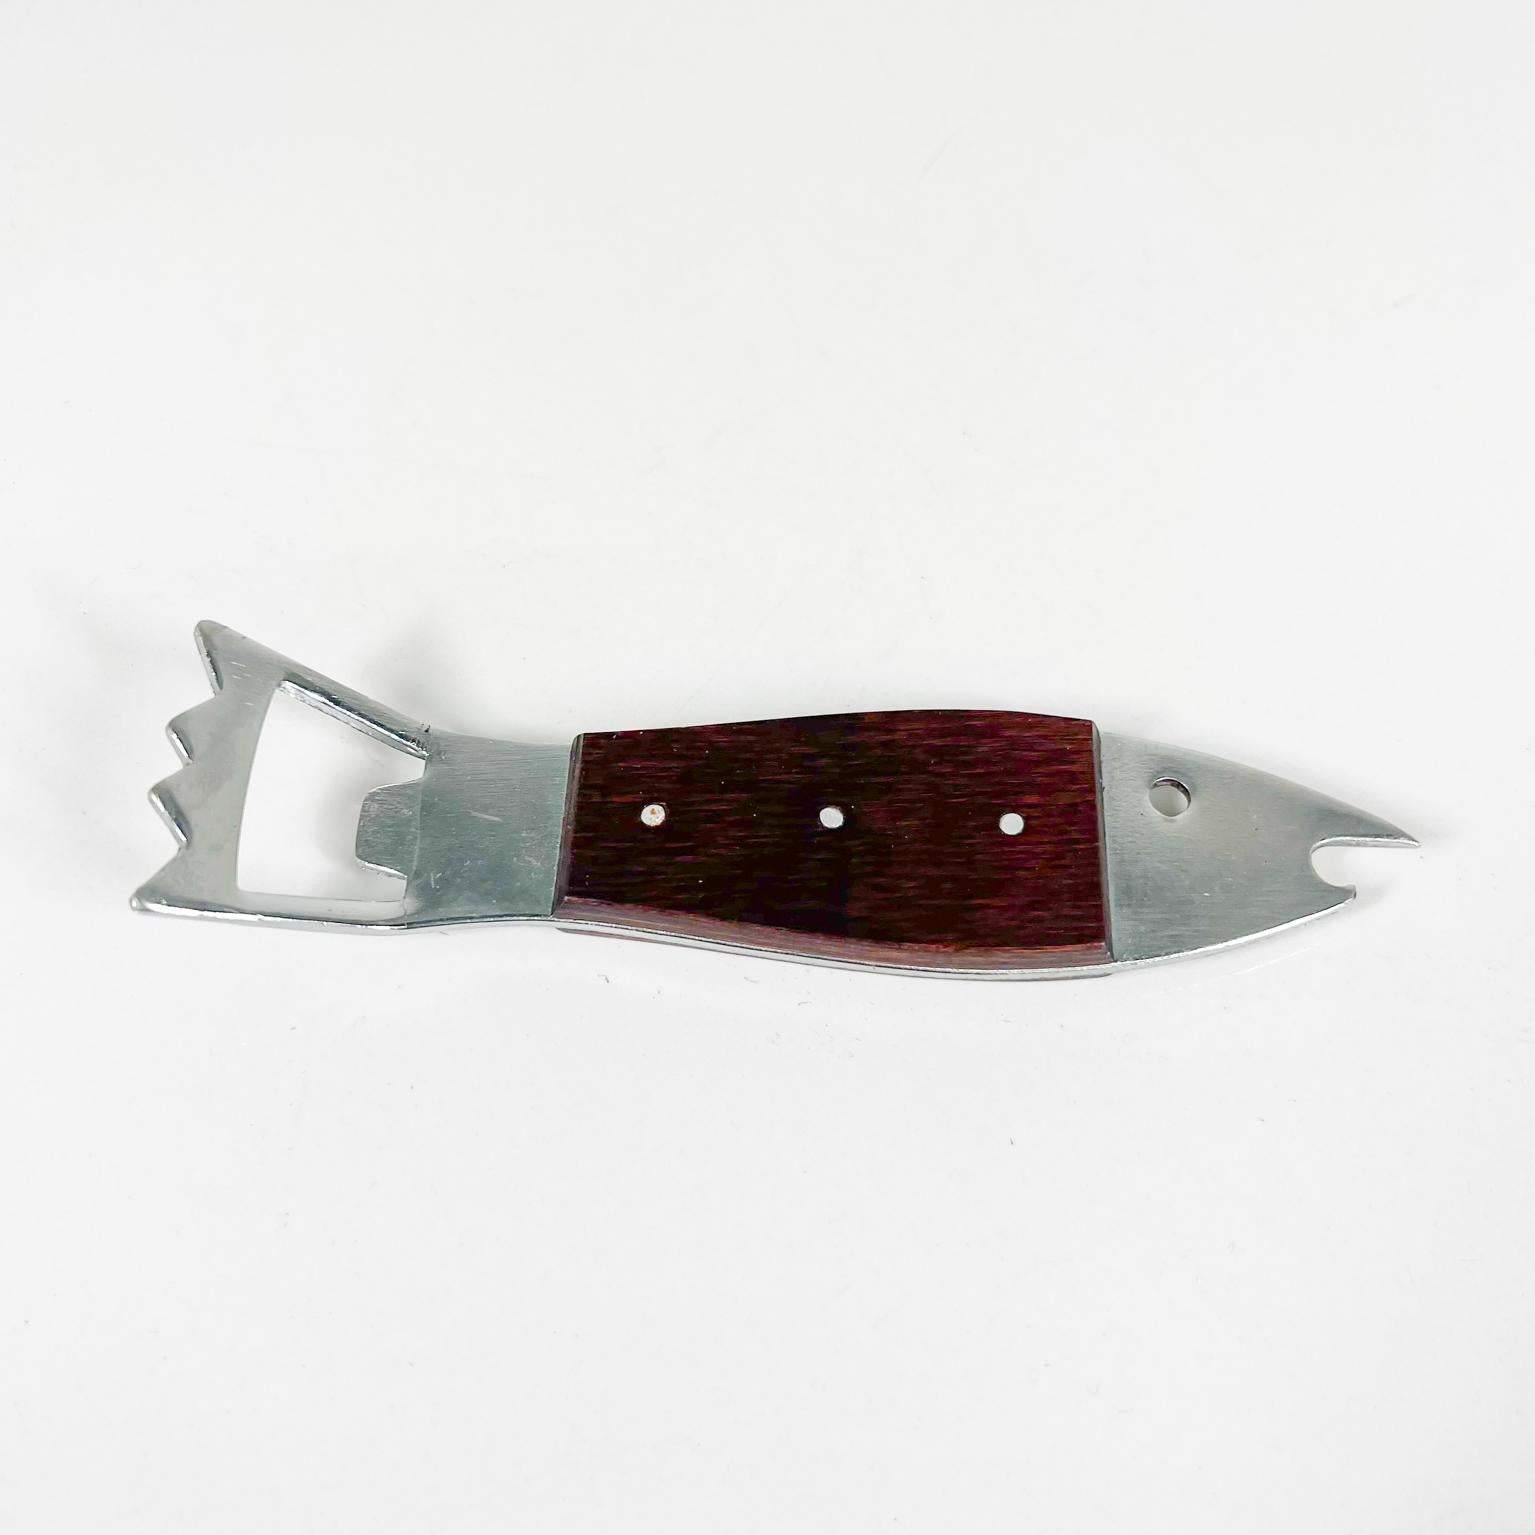 1960s Handy Rosewood Fish Bottle Opener Modernist 
Style of Carl Auböck
Unmarked. 
Stainless steel and rosewood.
5.75 w x 1d x 1.38 h
Preowned original vintage condition.
Please see images.